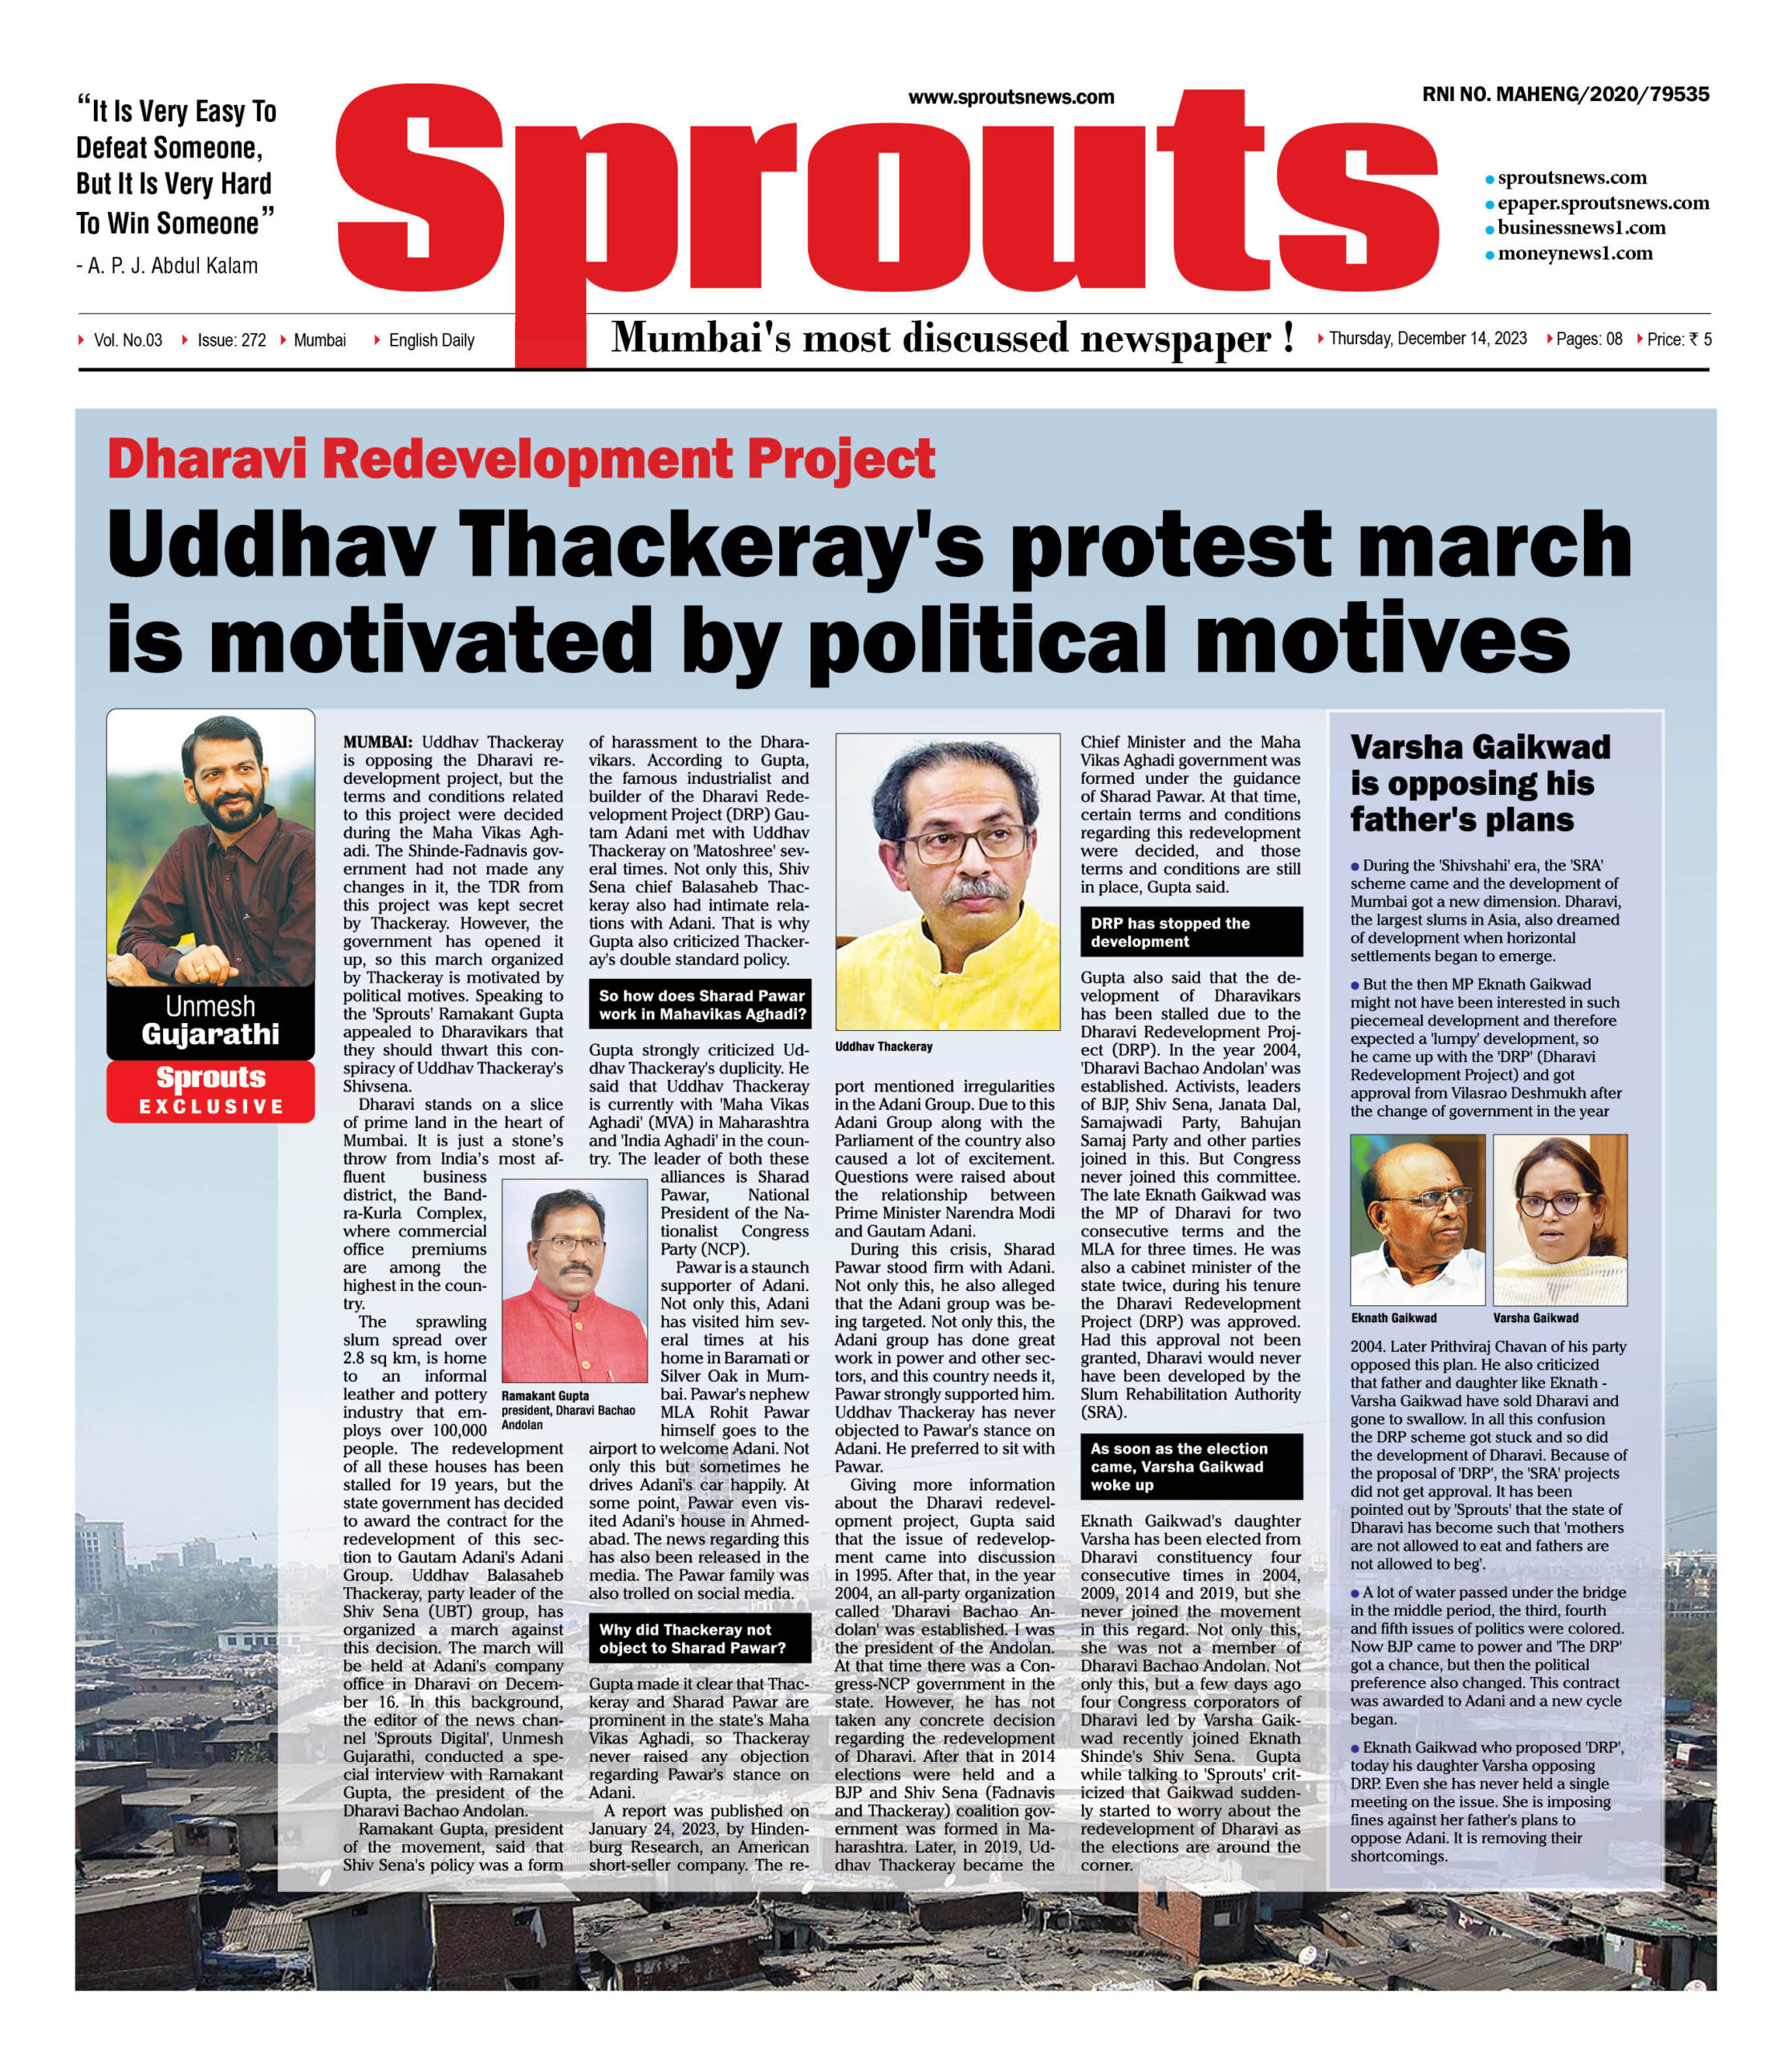 Uddhav Thackeray’s protest march is motivated by political motives